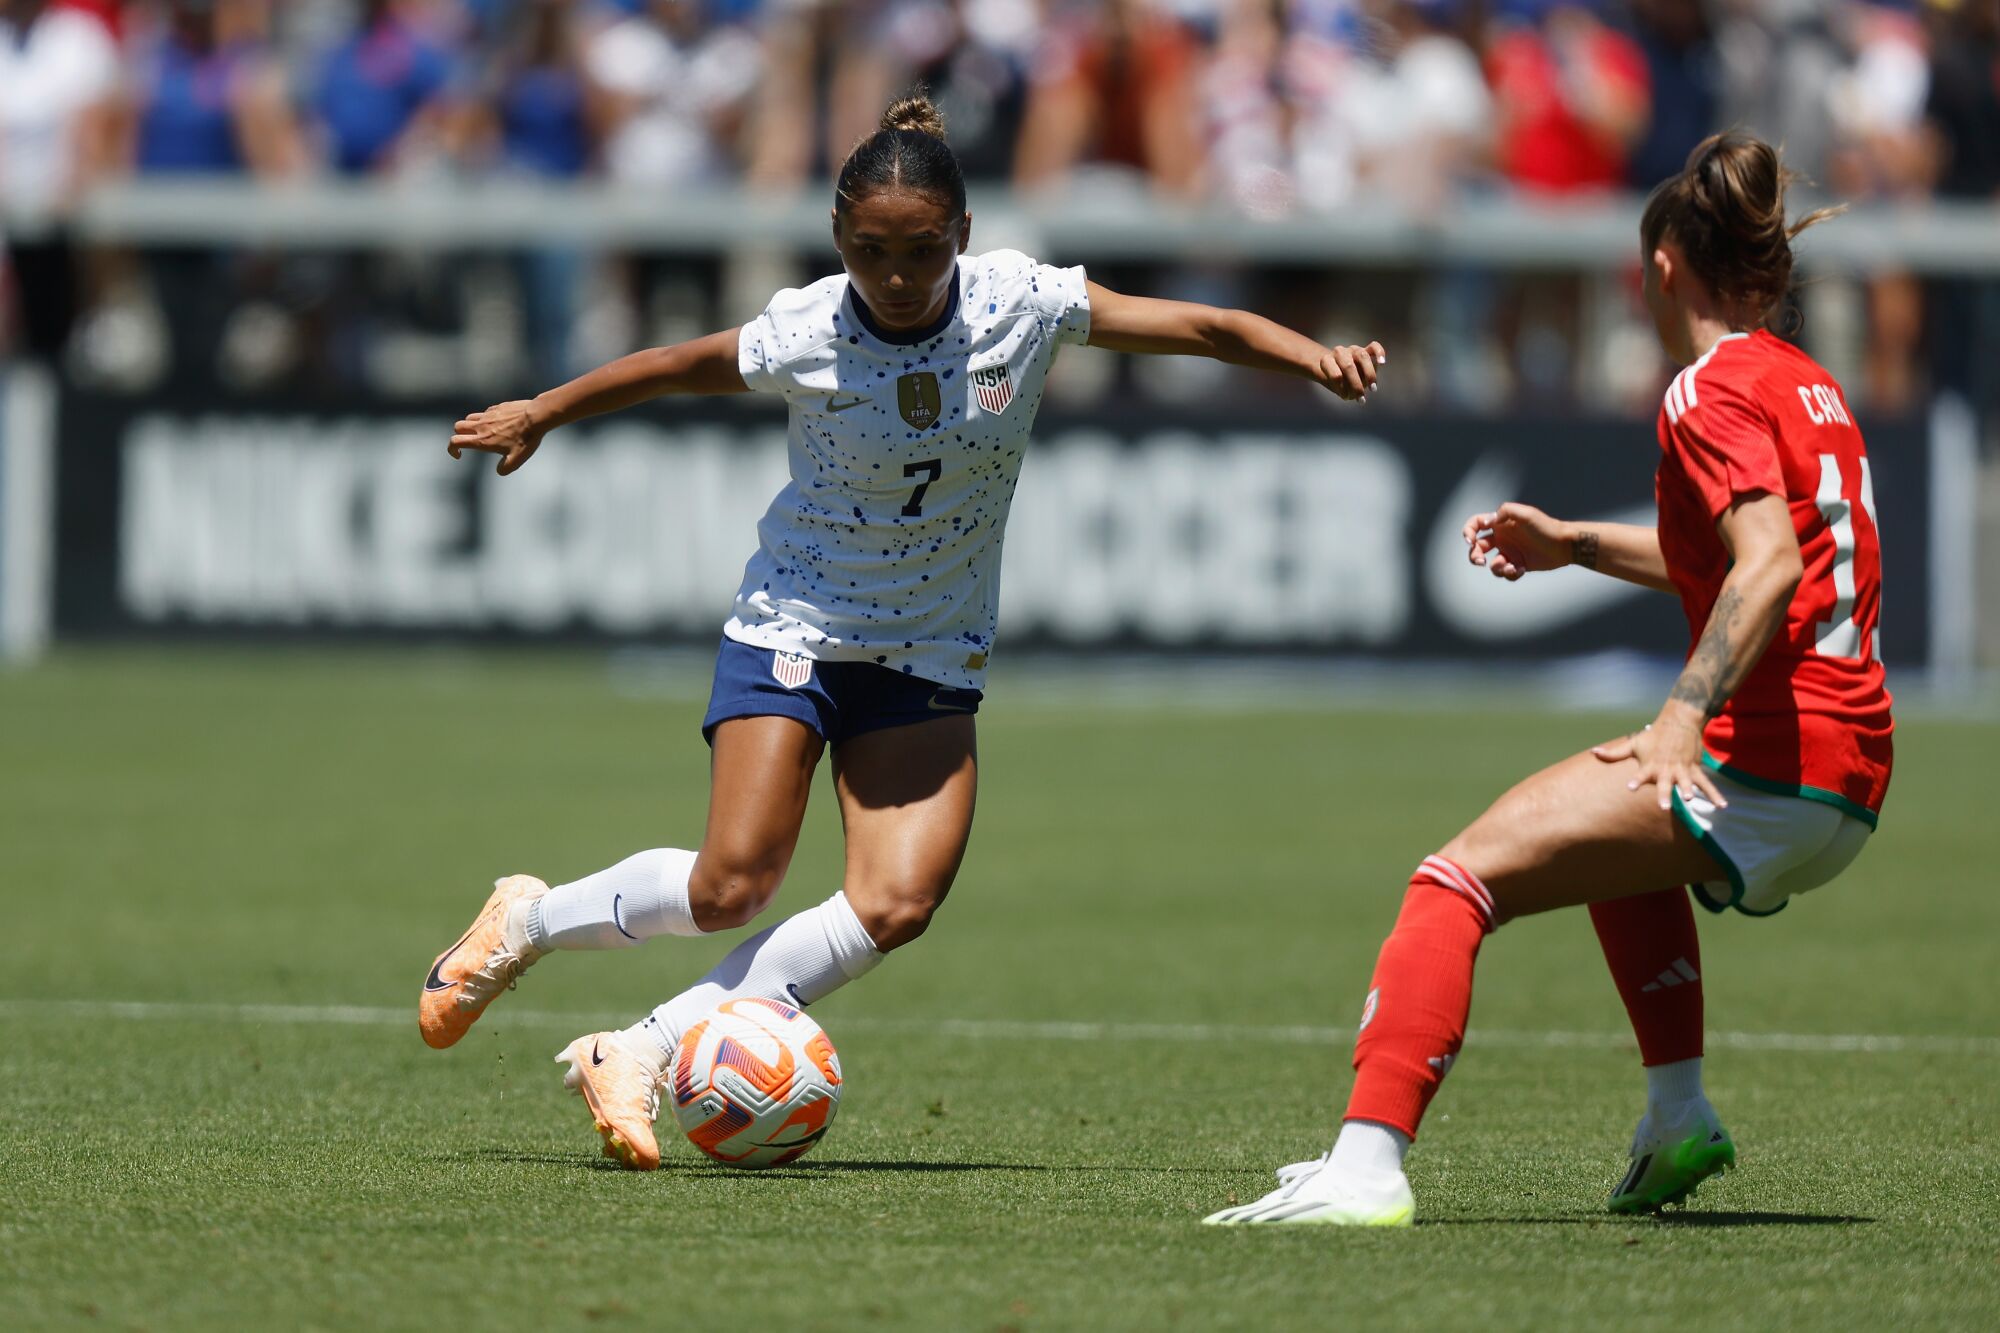 Alyssa Thompson controls the ball during a friendly match between the U.S. and Wales on July 9.